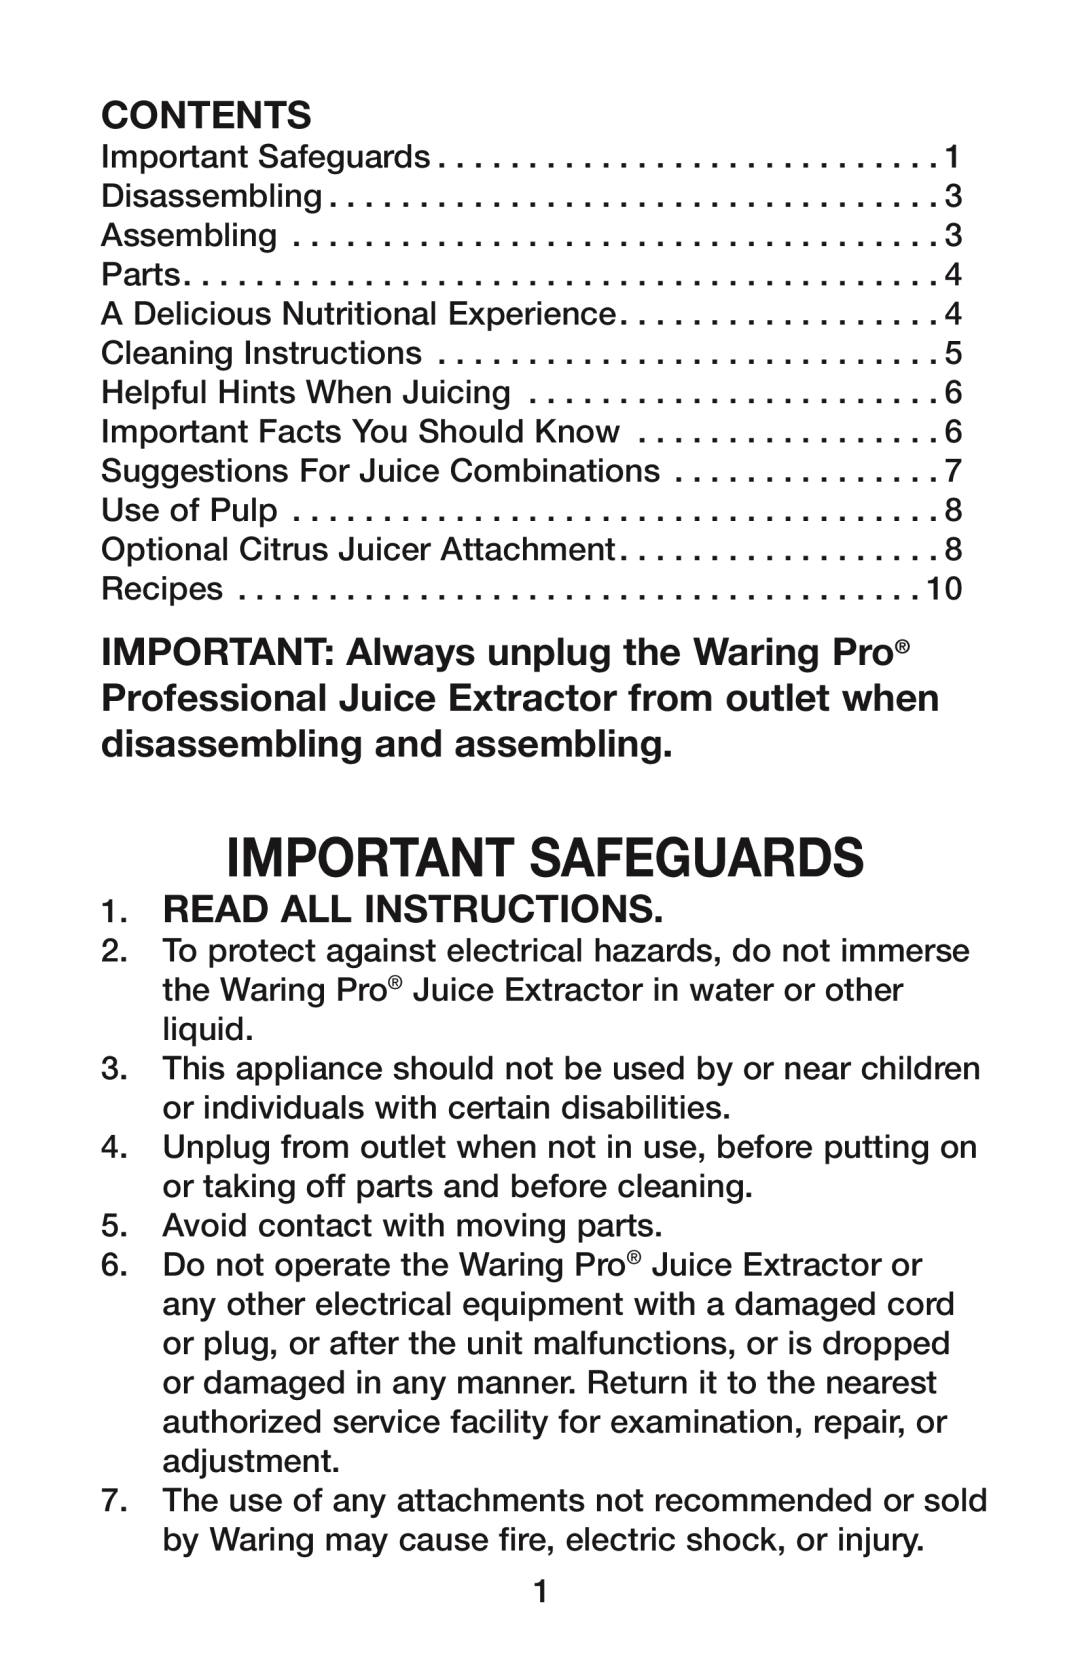 Waring PJE Series manual Important Safeguards, Contents, Read All Instructions 